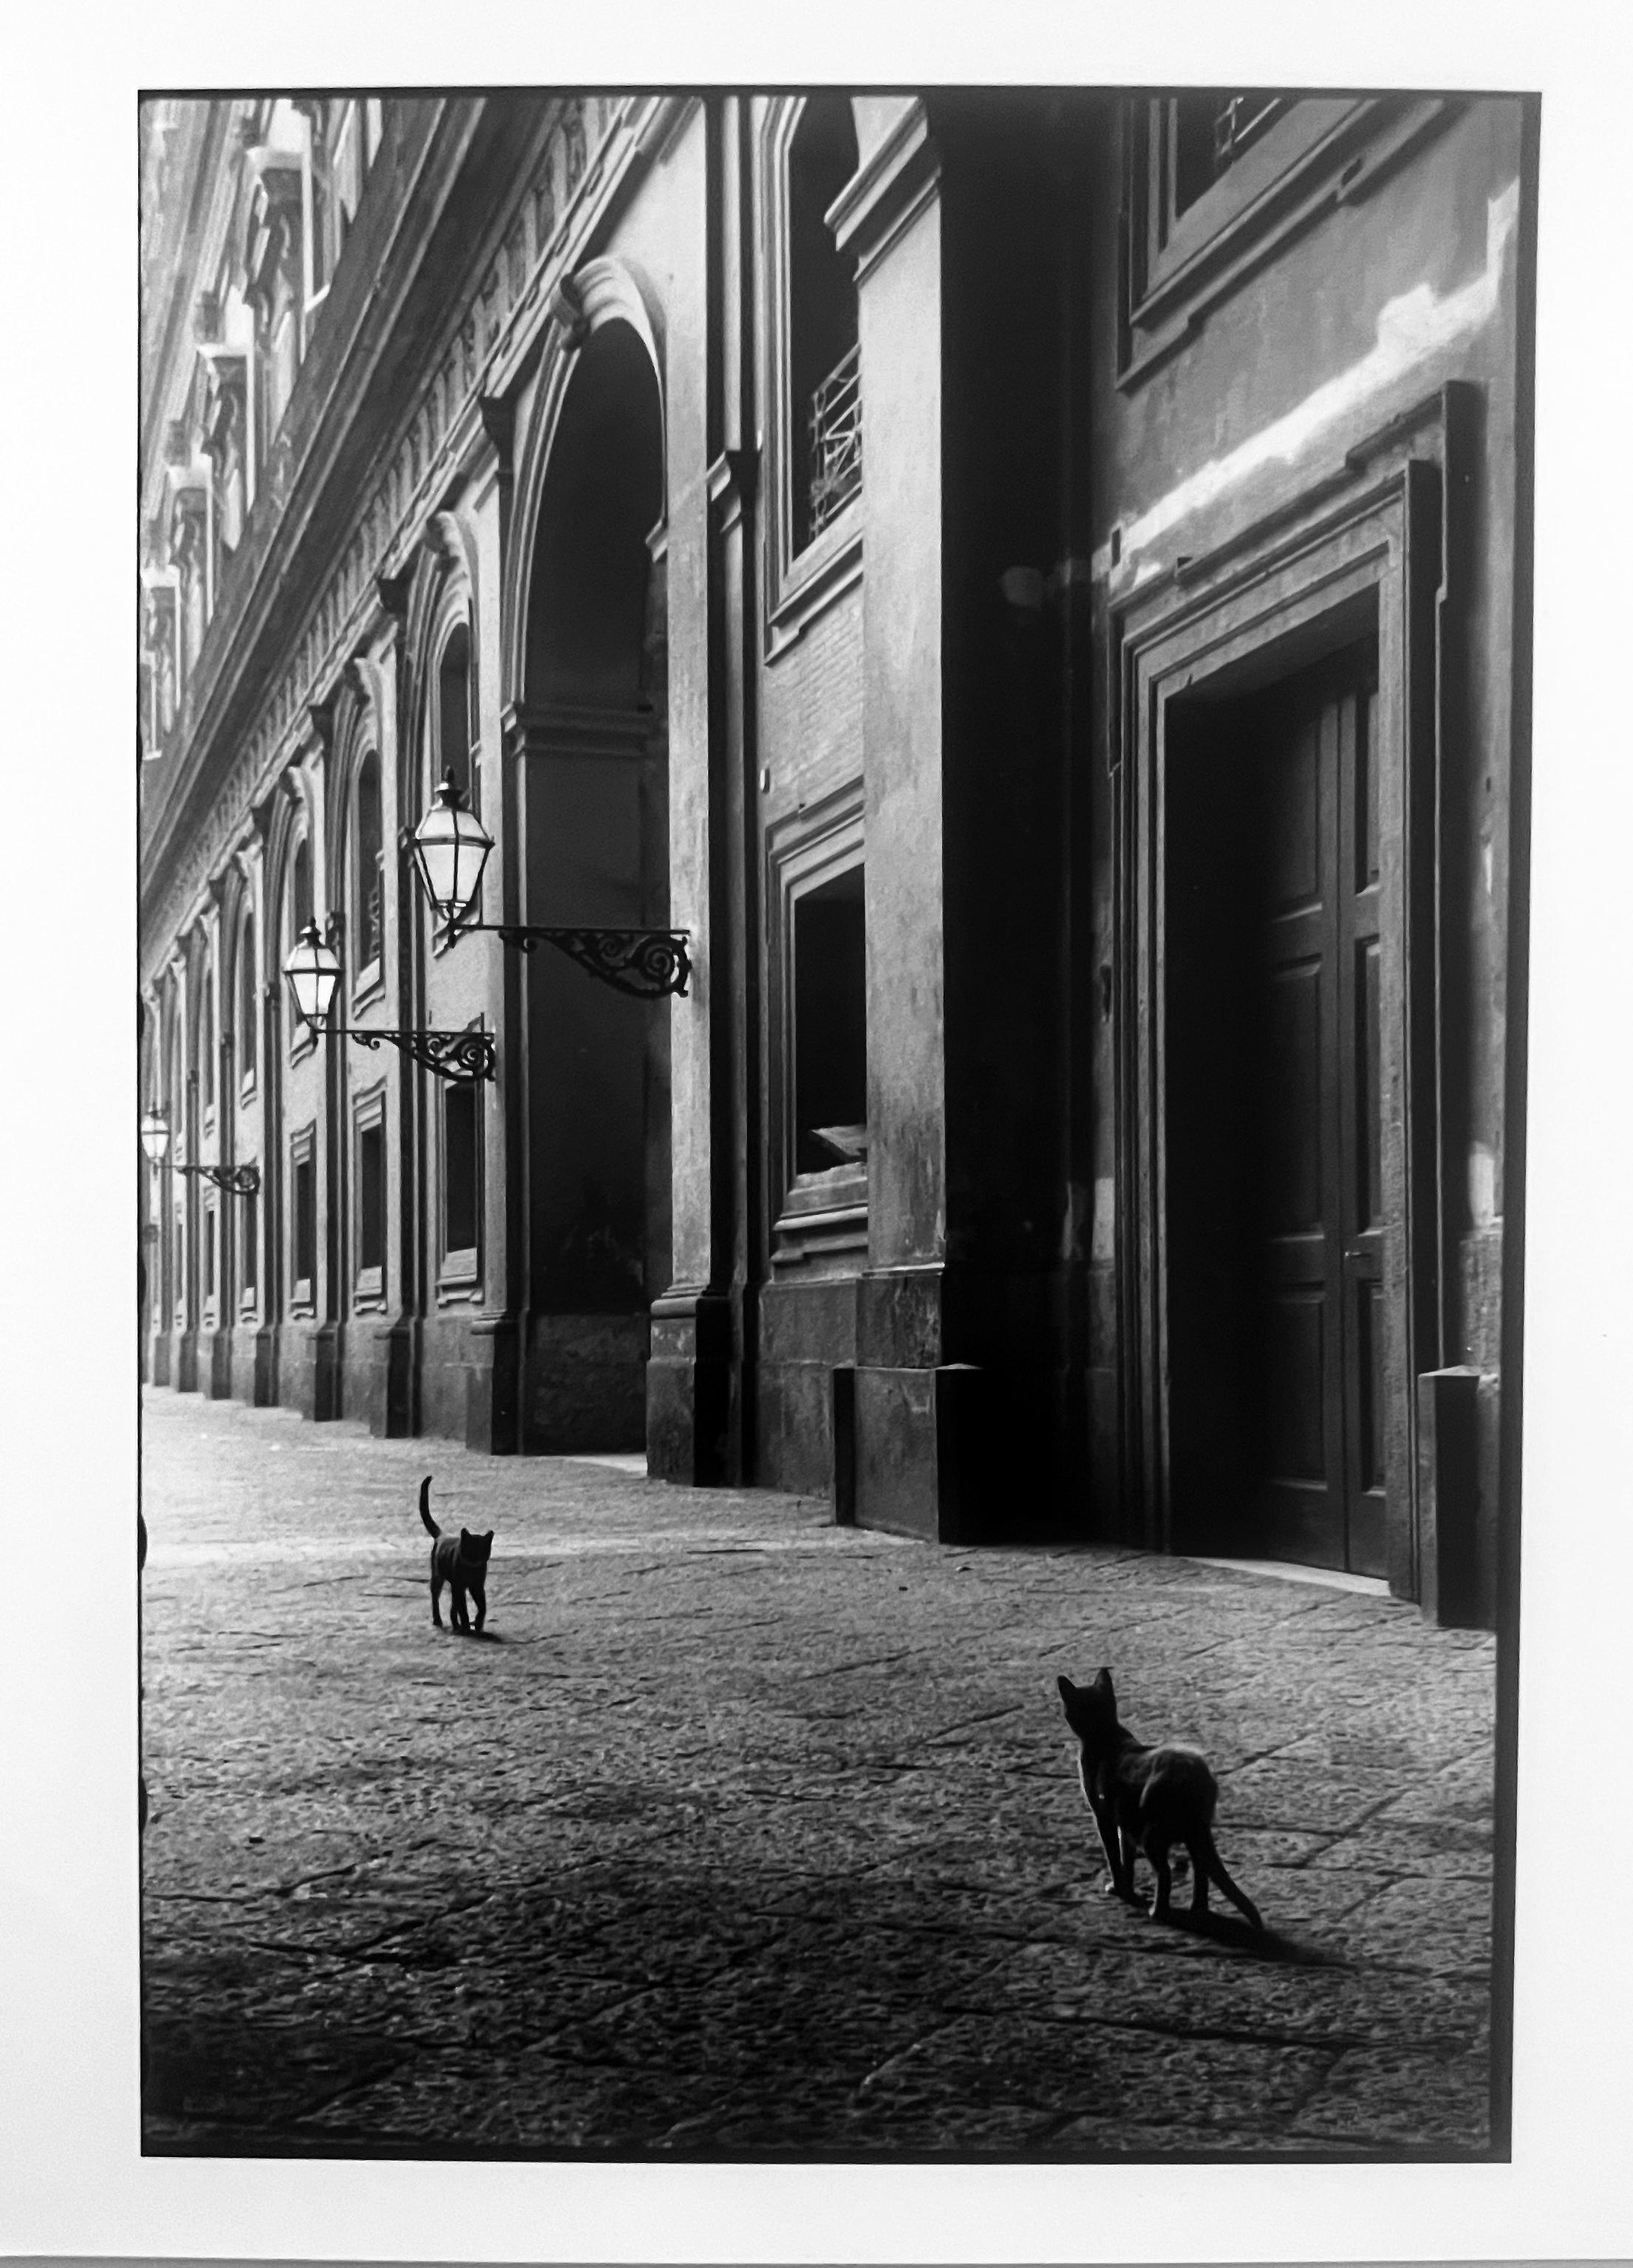 Leonard Freed Black and White Photograph - Cats, Naples, Italy, Black and White Street Photography 1950s